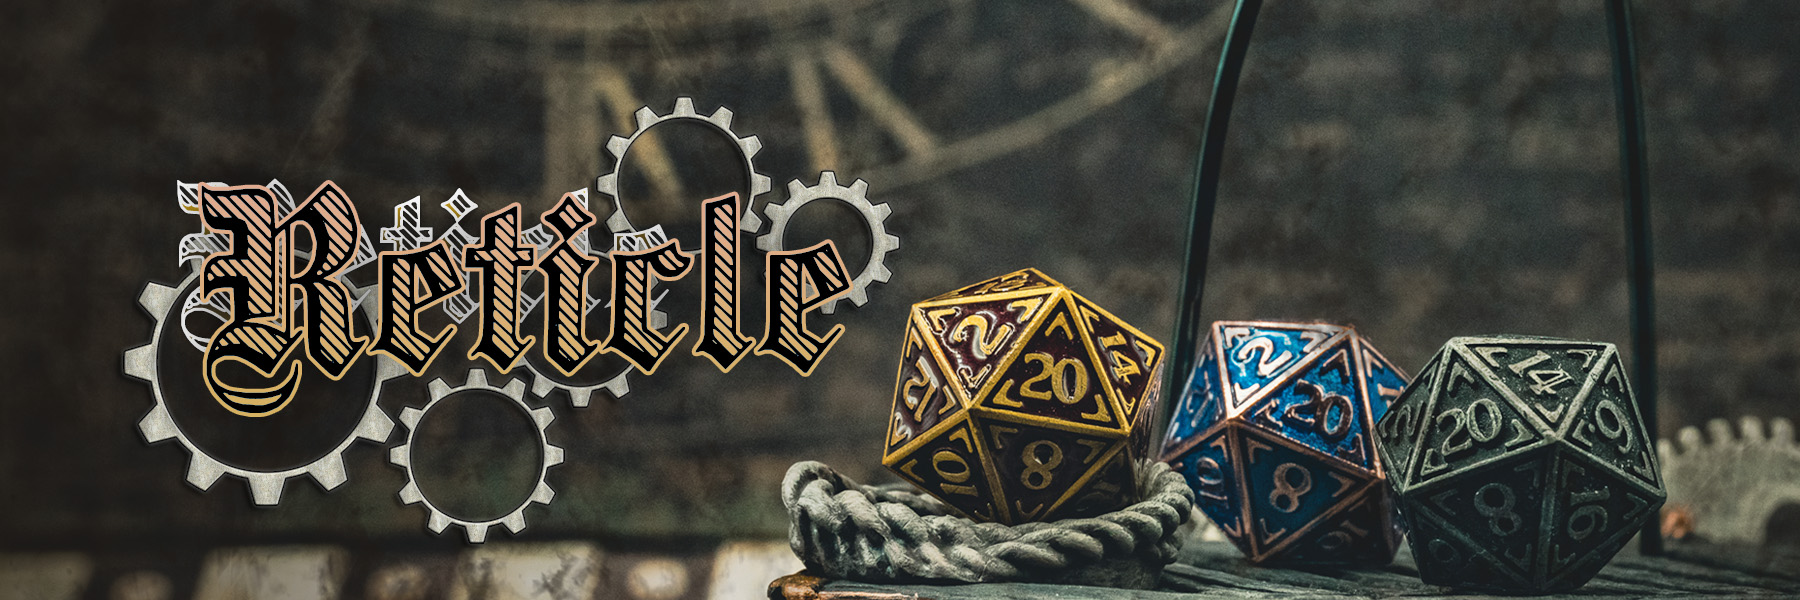 Reticle - New Dice From Die Hard Dice!